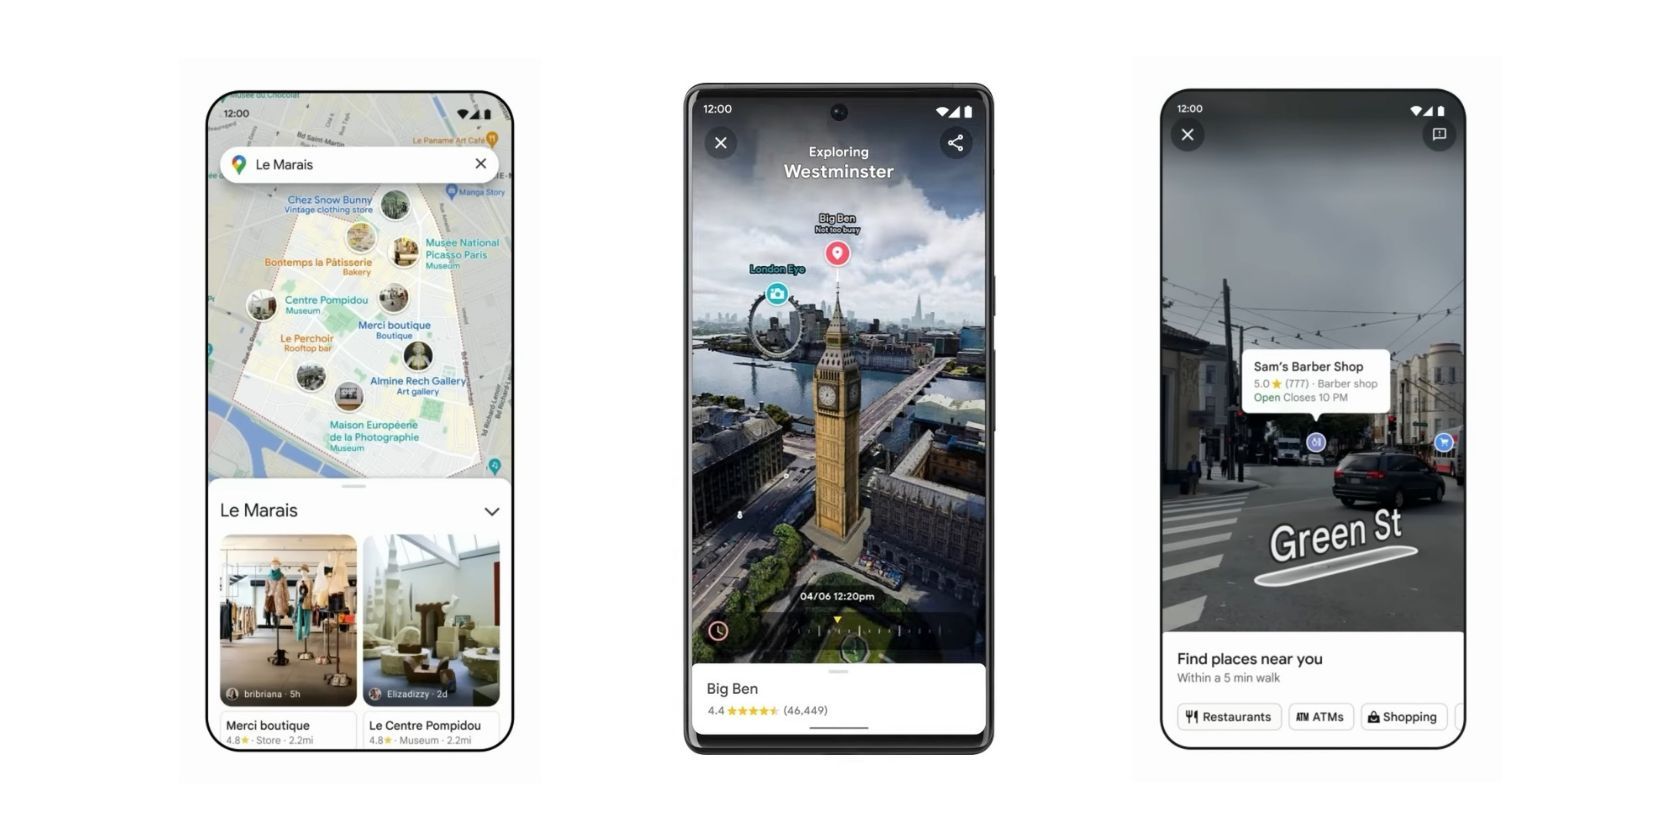 Google Maps features Neighborhood Vibe, Immersive View, and Live View